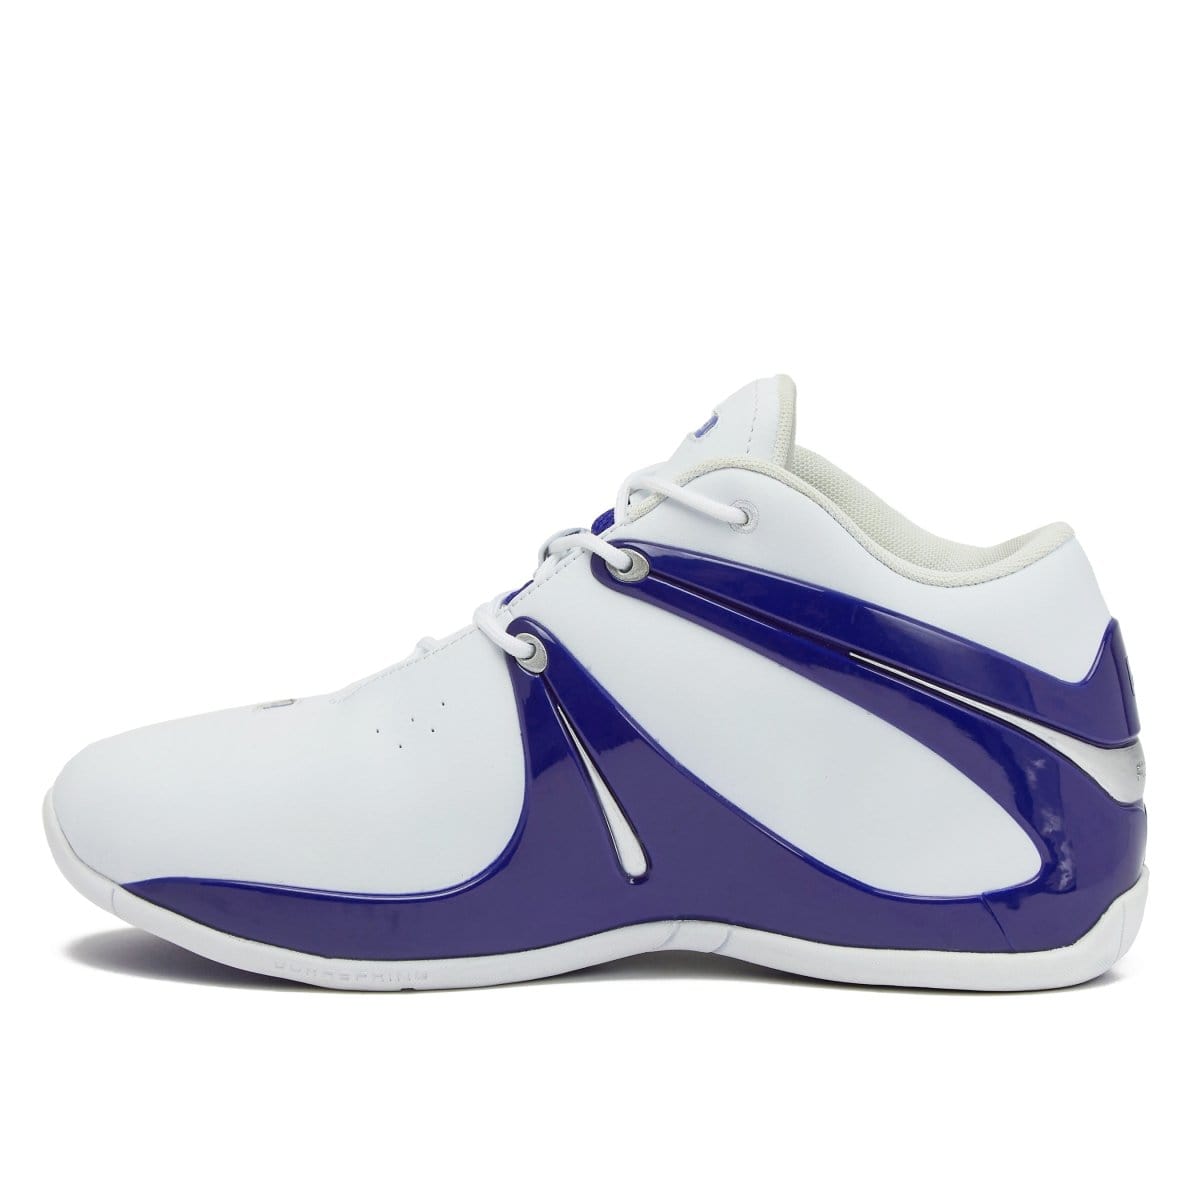 AND-1 AND-1 MEN'S RISE WHITE/BLUE BASKETBALL SHOES - INSPORT